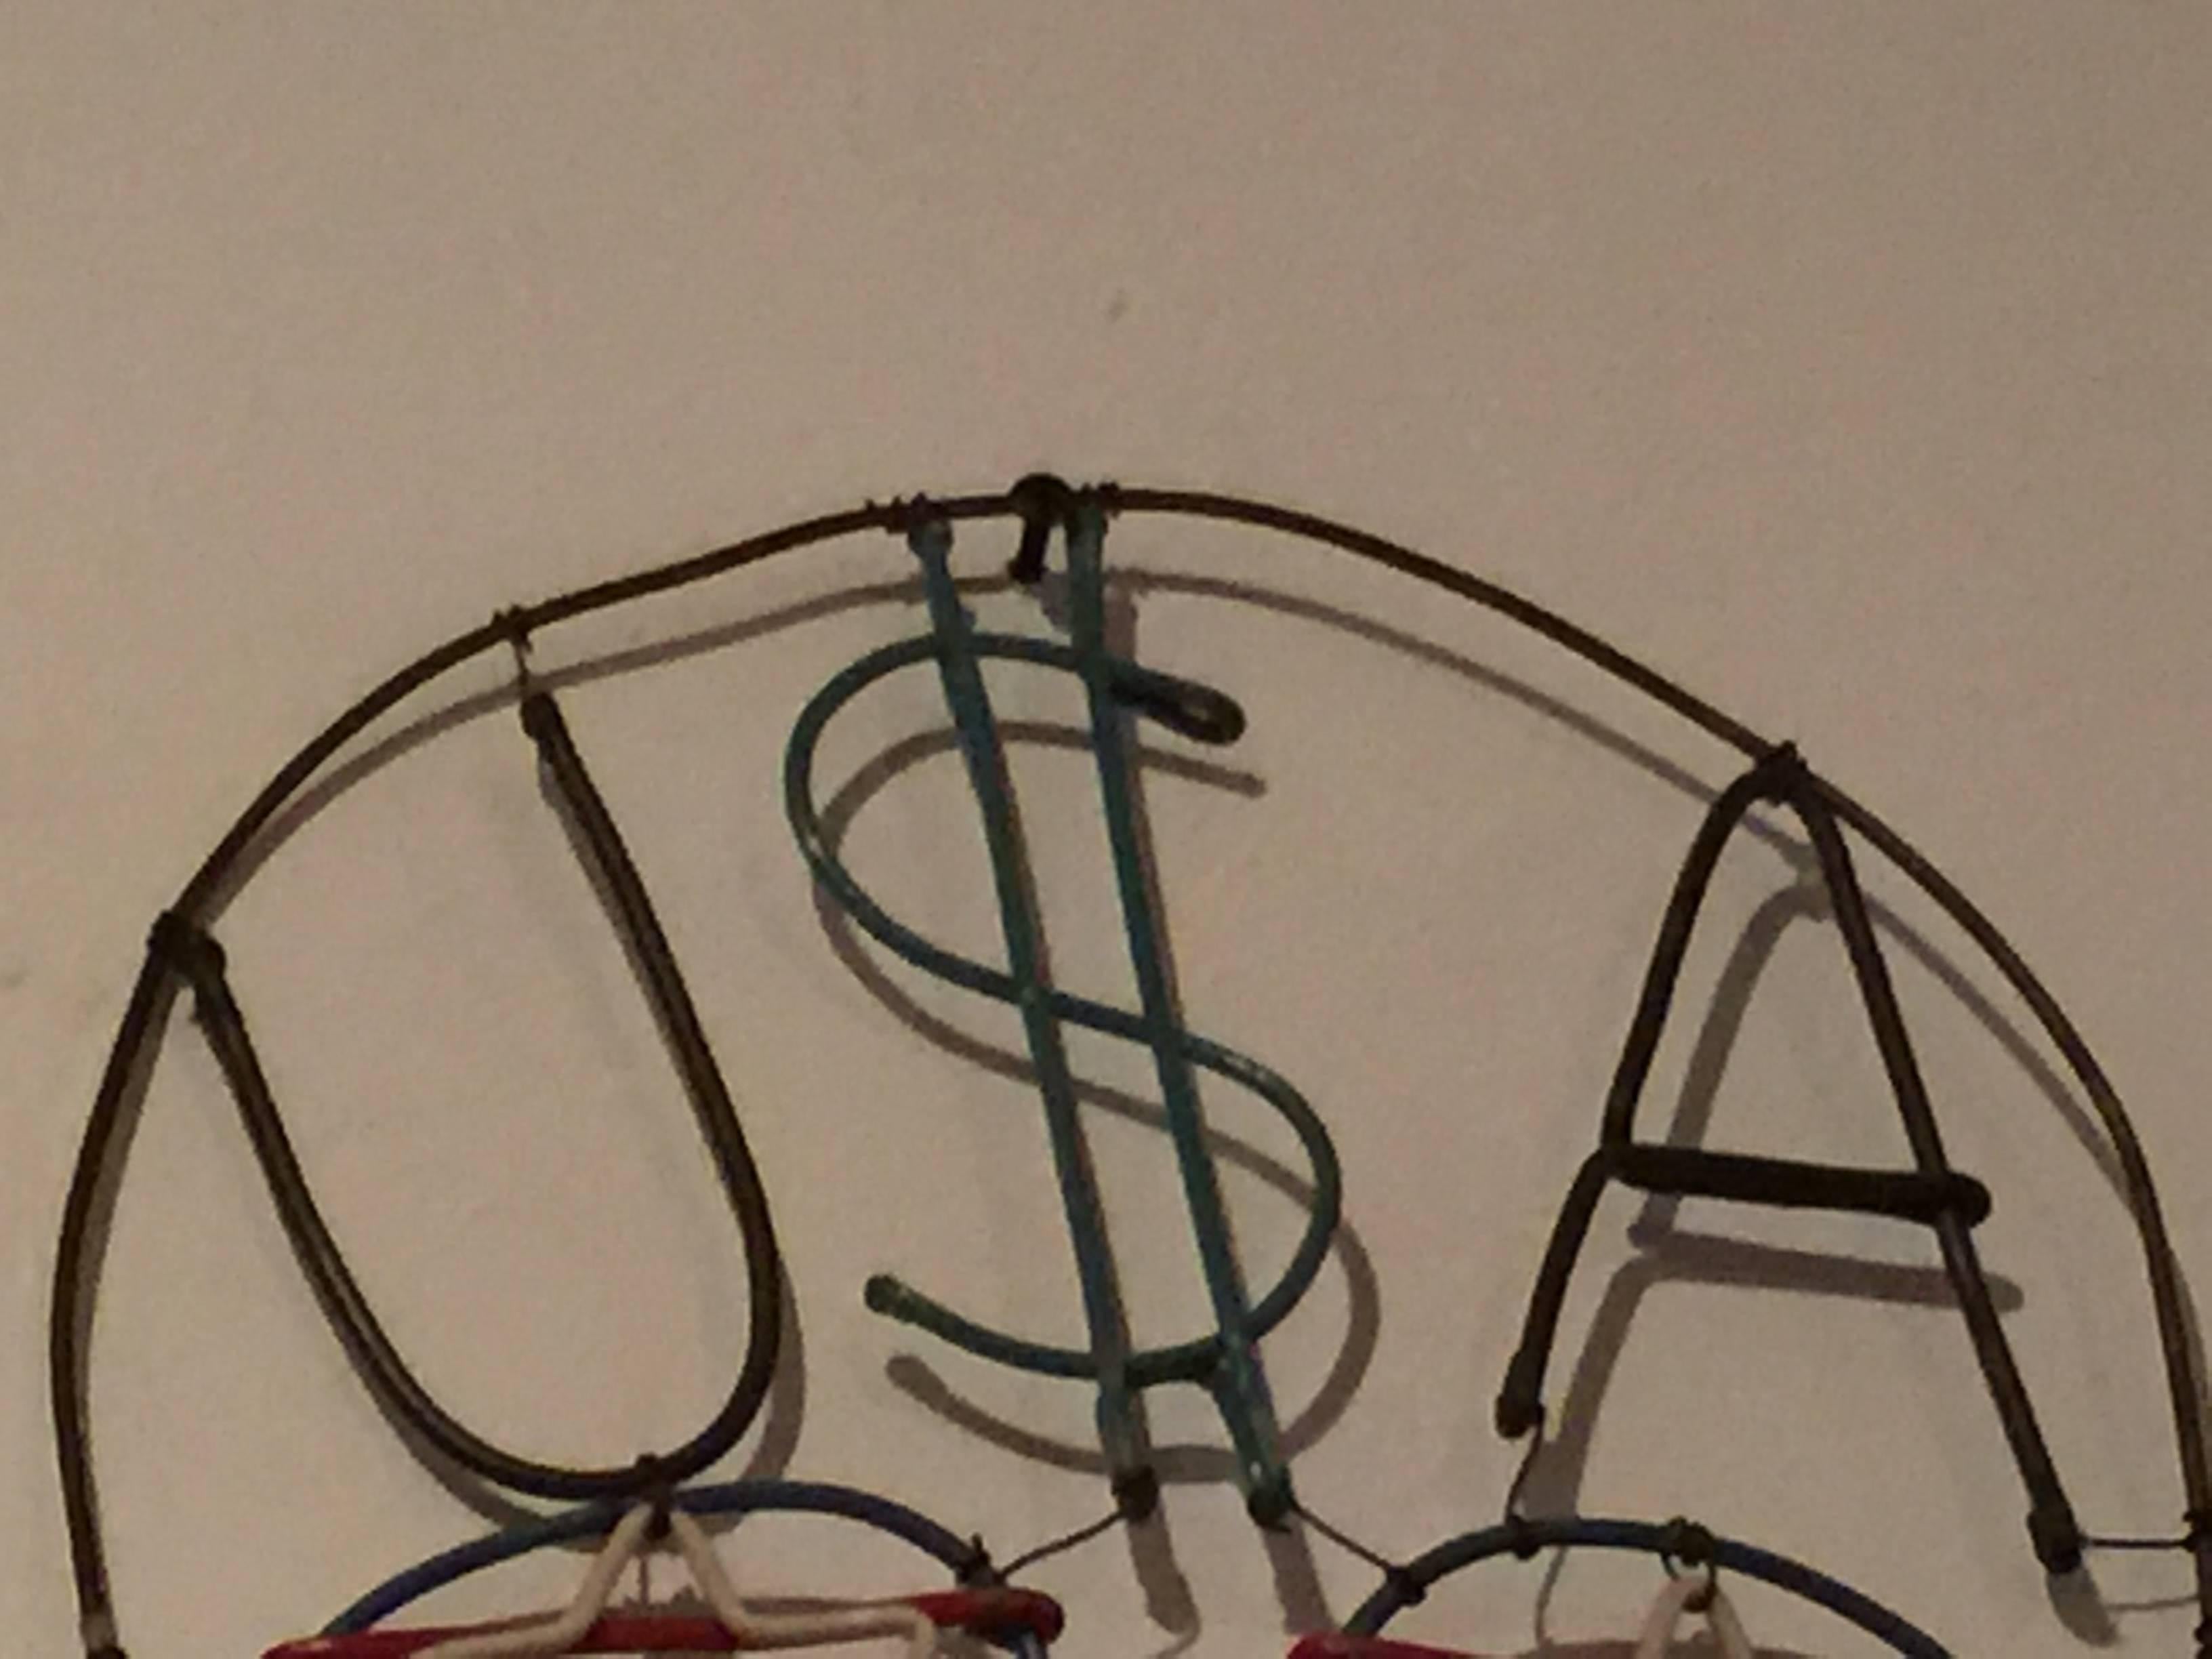 Handmade wire and wood skull. The S in USA has been augmented into an dollar sign.